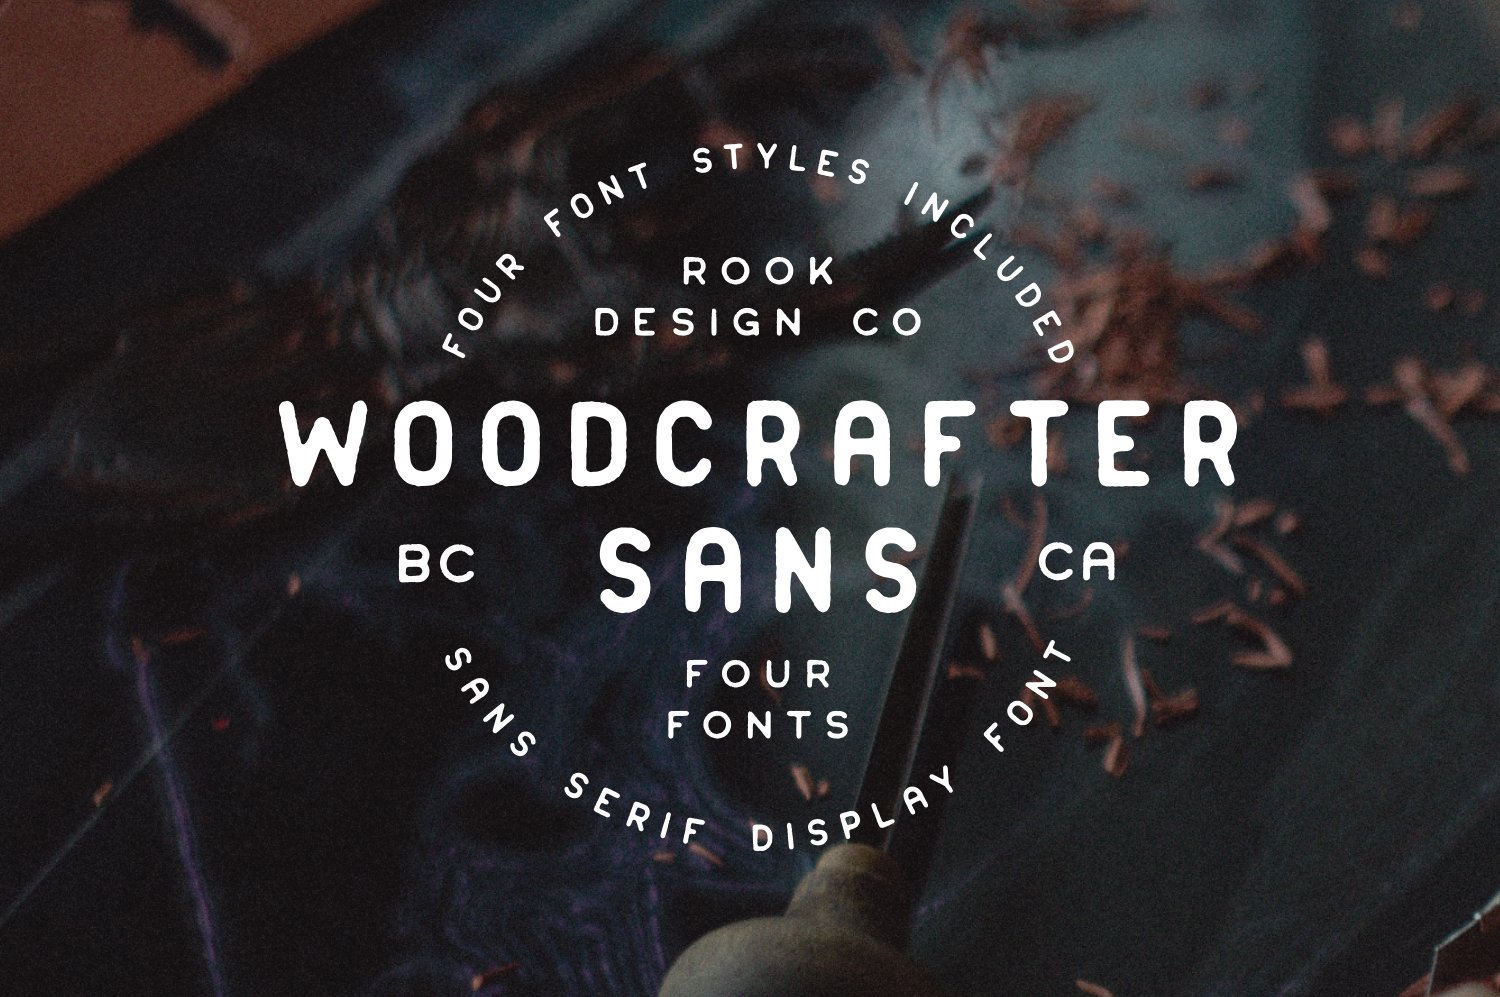 Woodcrafter Sans - 4 Font Family cover image.